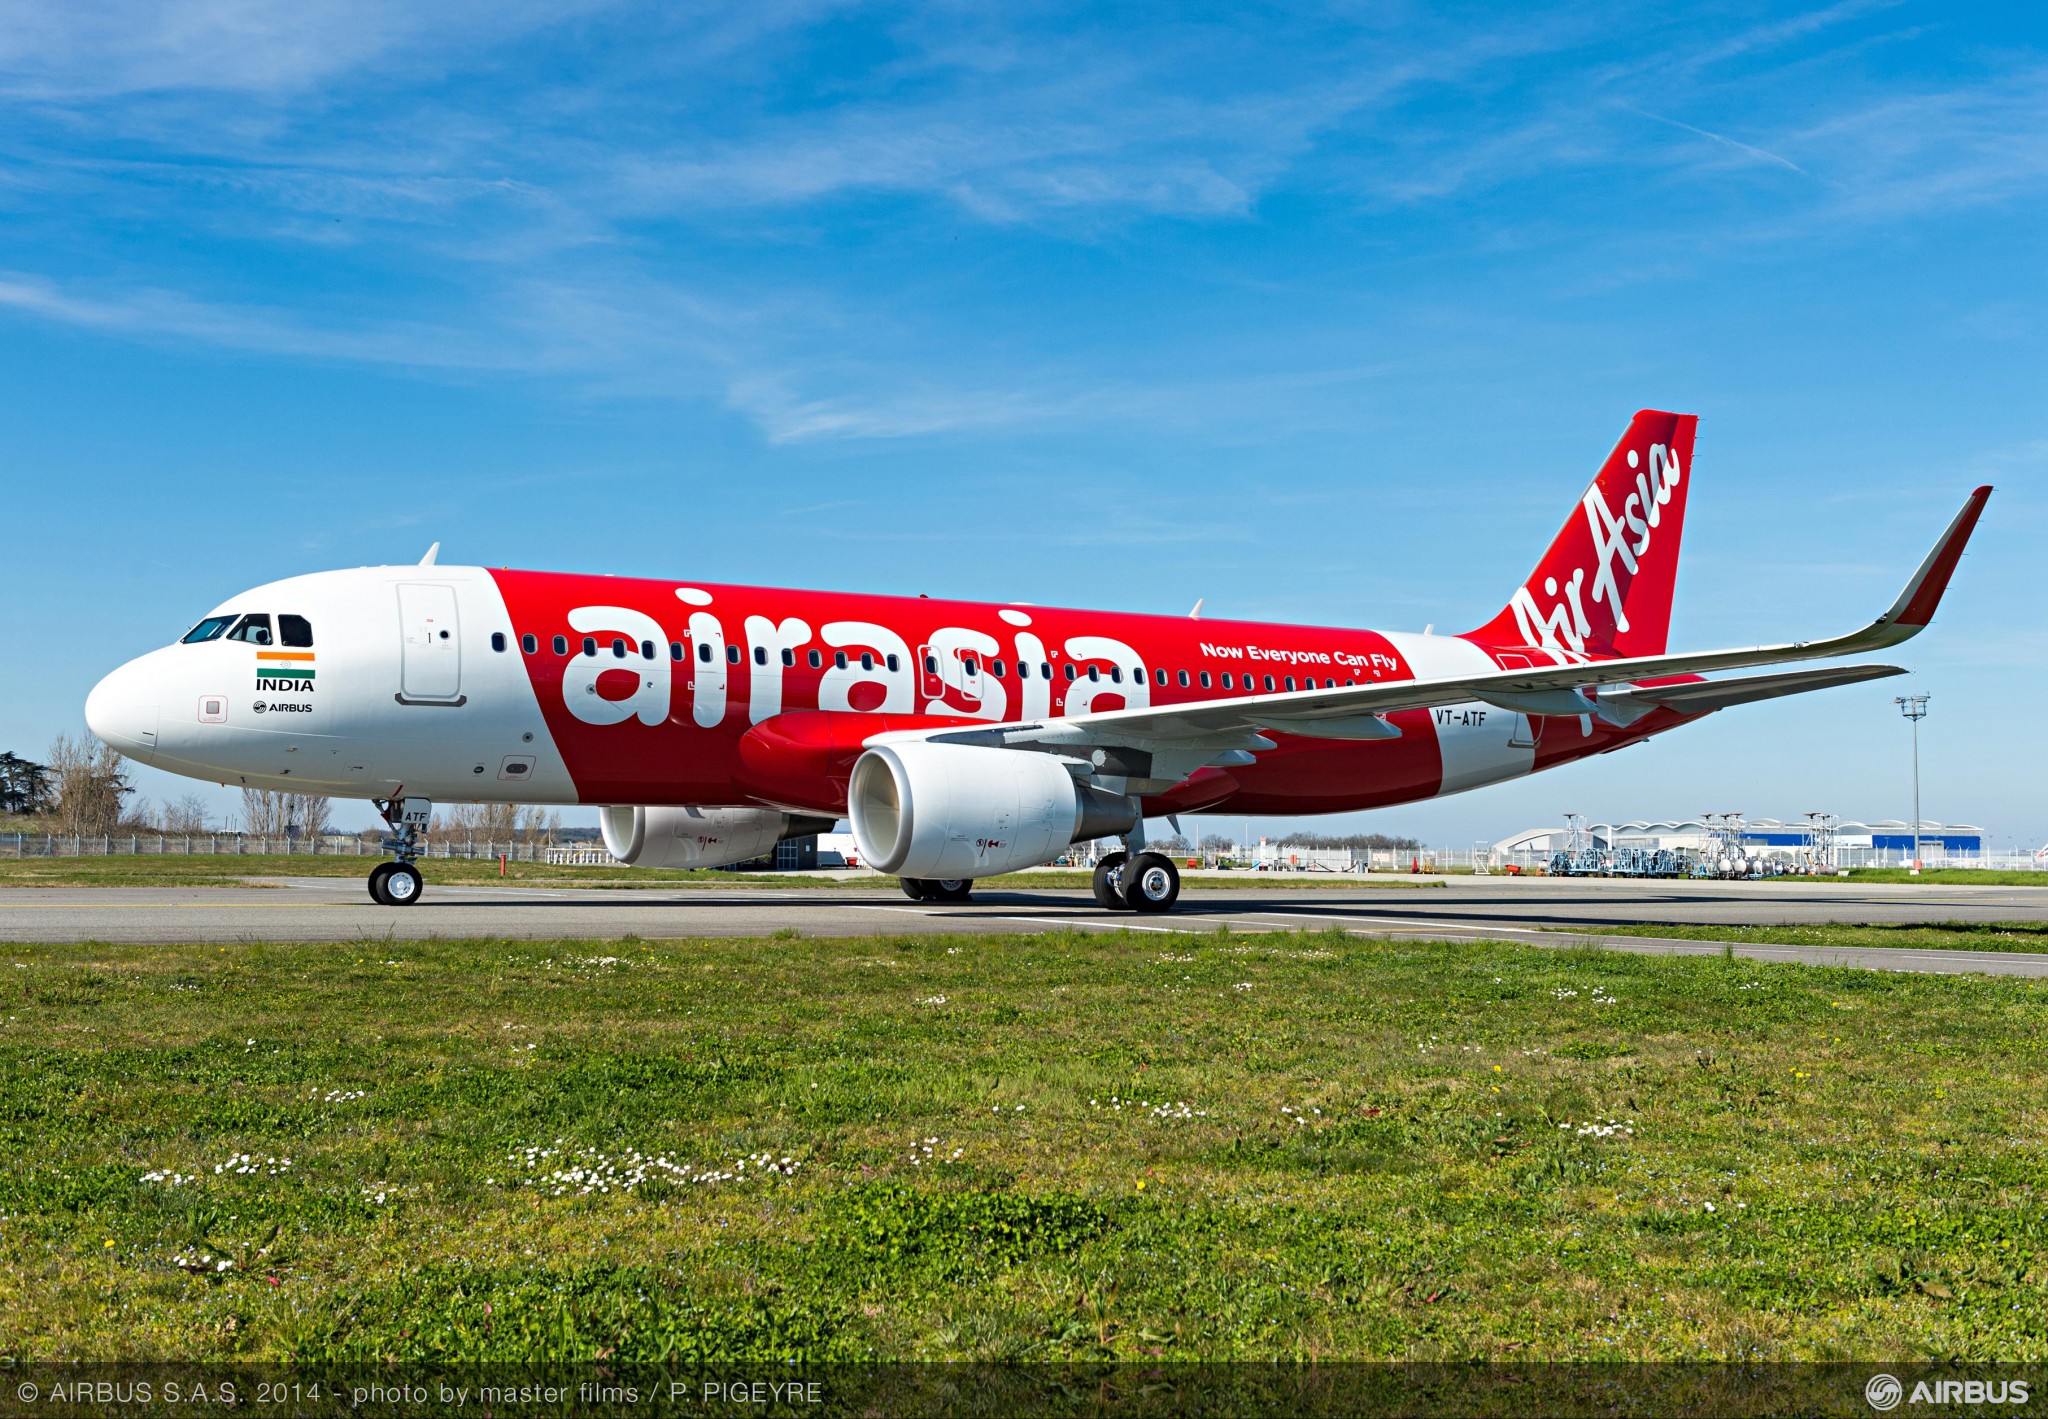 Air Asia India operates first flight using SAF blend